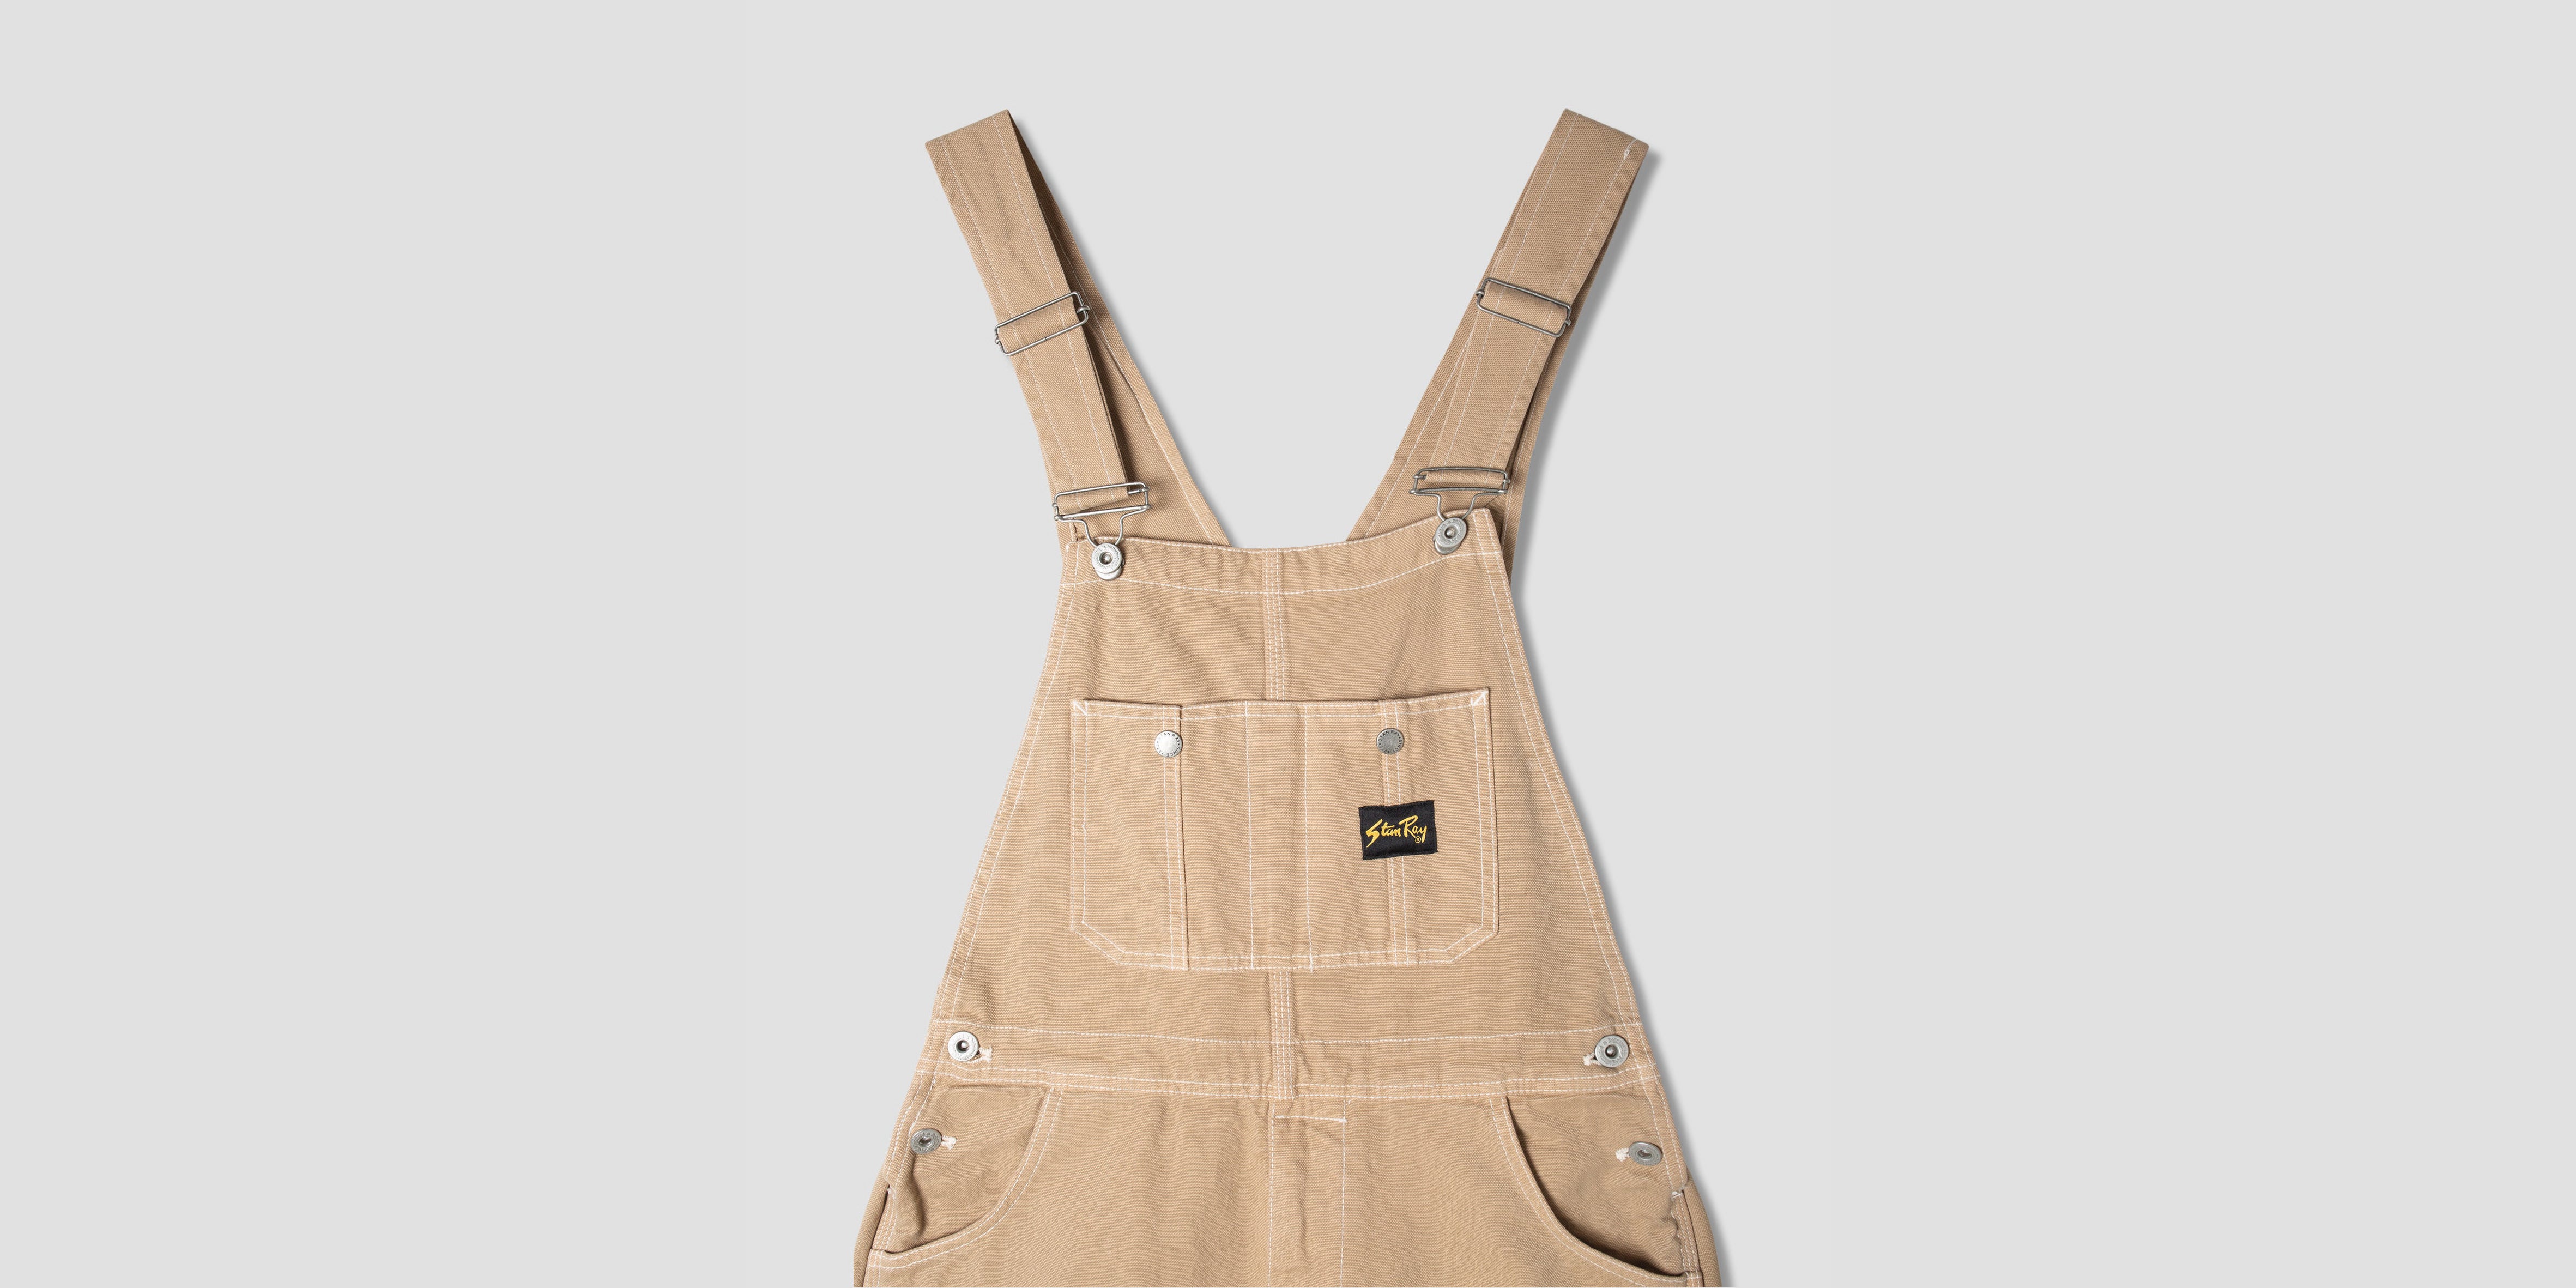 Get Dressed up with a Dungaree Dress – Dotty Dungarees Ltd